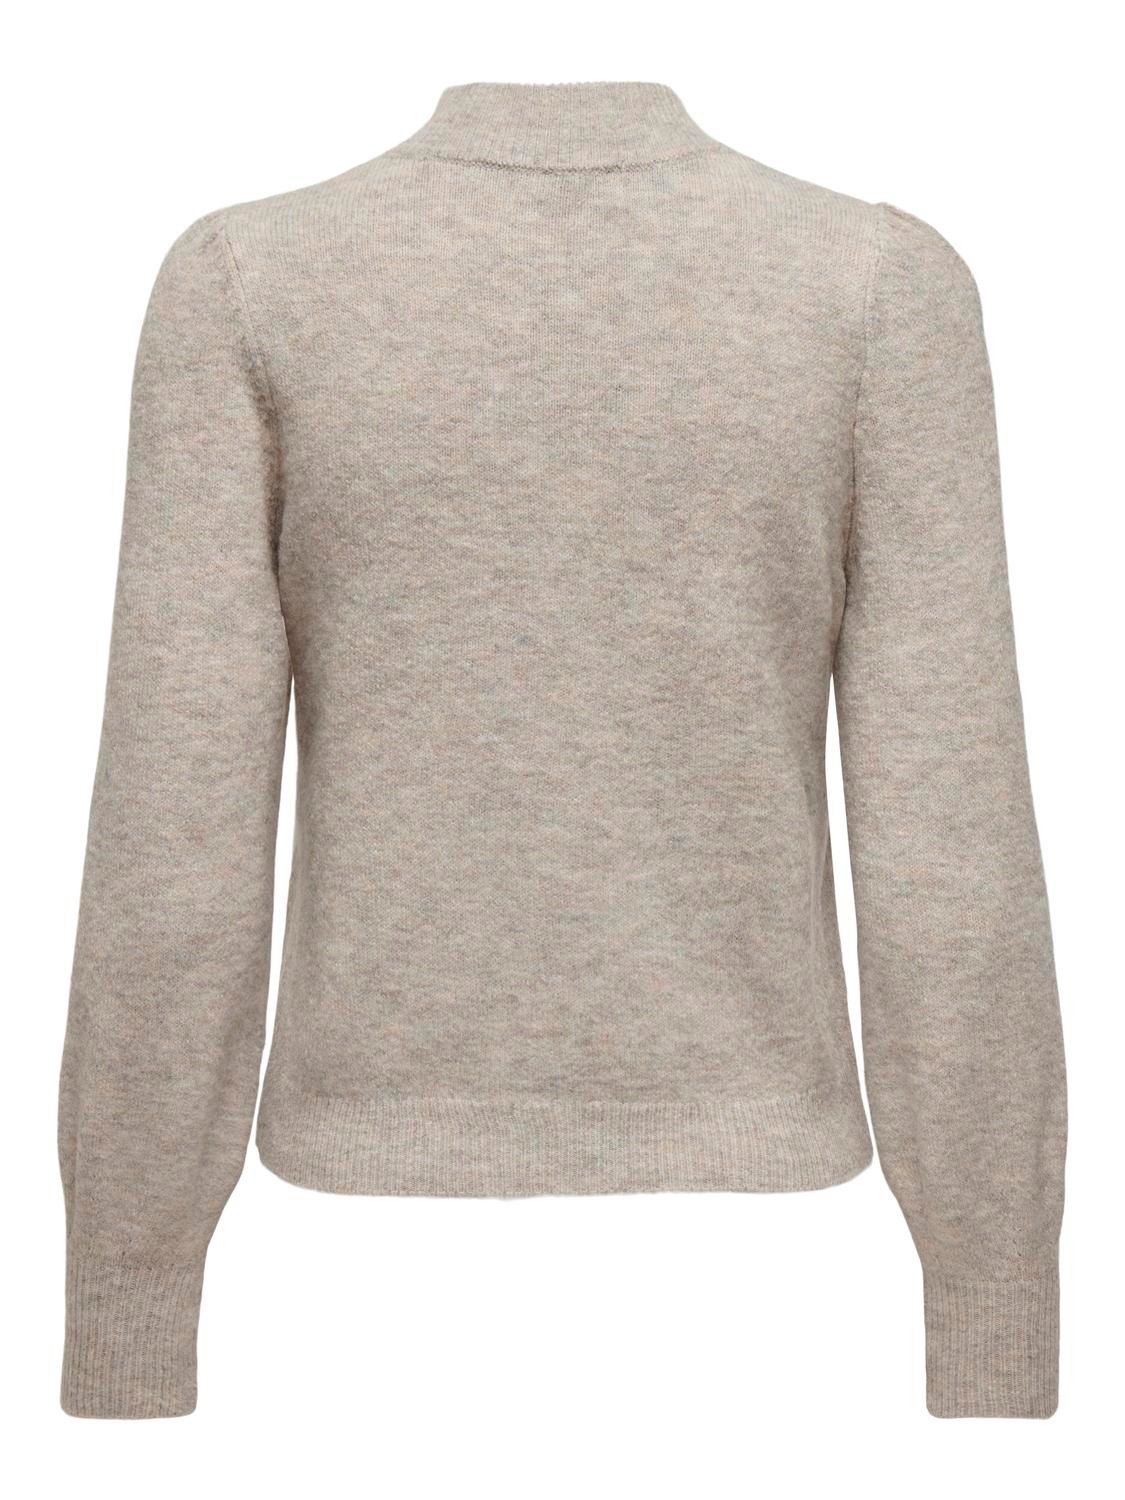 ONLY Strikket Pullover -Chateau Gray - 15216638